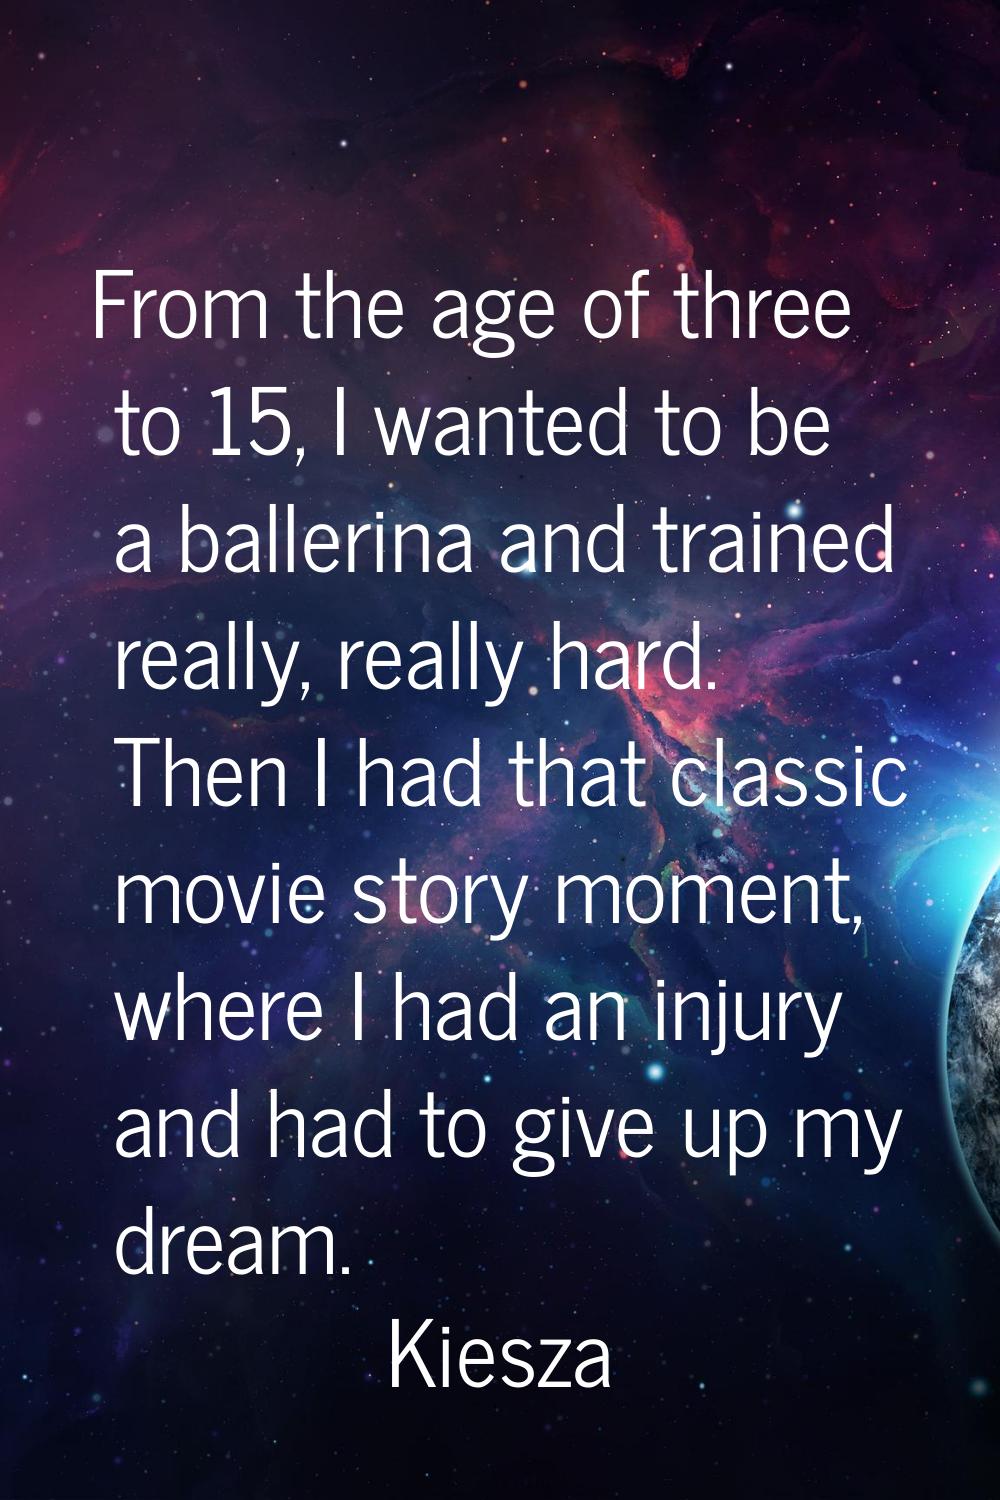 From the age of three to 15, I wanted to be a ballerina and trained really, really hard. Then I had